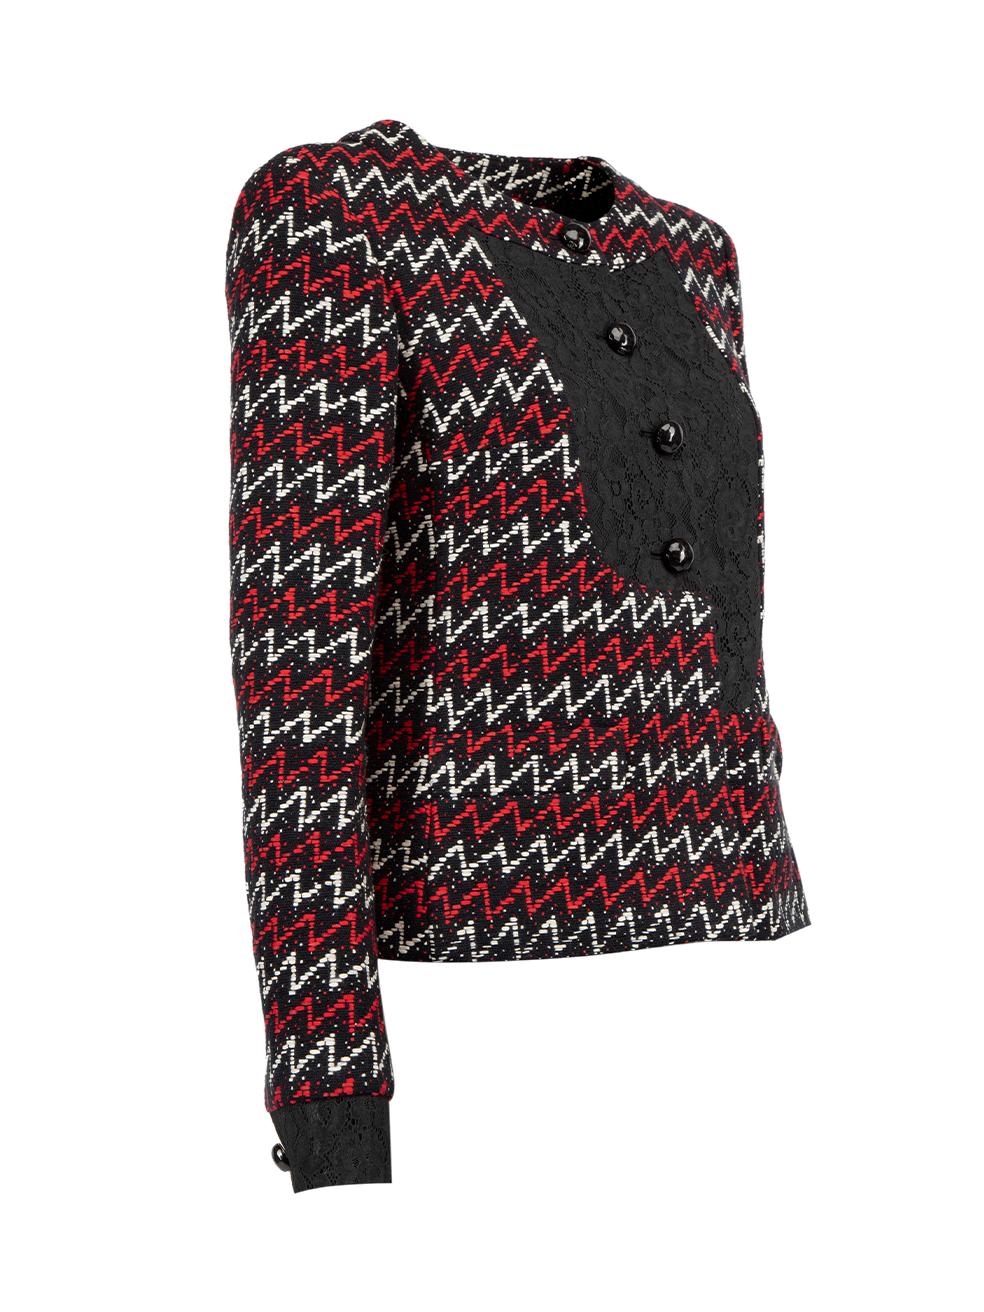 CONDITION is Very good. Hardly any visible wear to jacket is evident on this used Chanel designer resale item.   Details  SS 2015 Multicolour- Black, white and red Tweed Fitted jacket Chevron stripe pattern Short length Black lace detail on centre